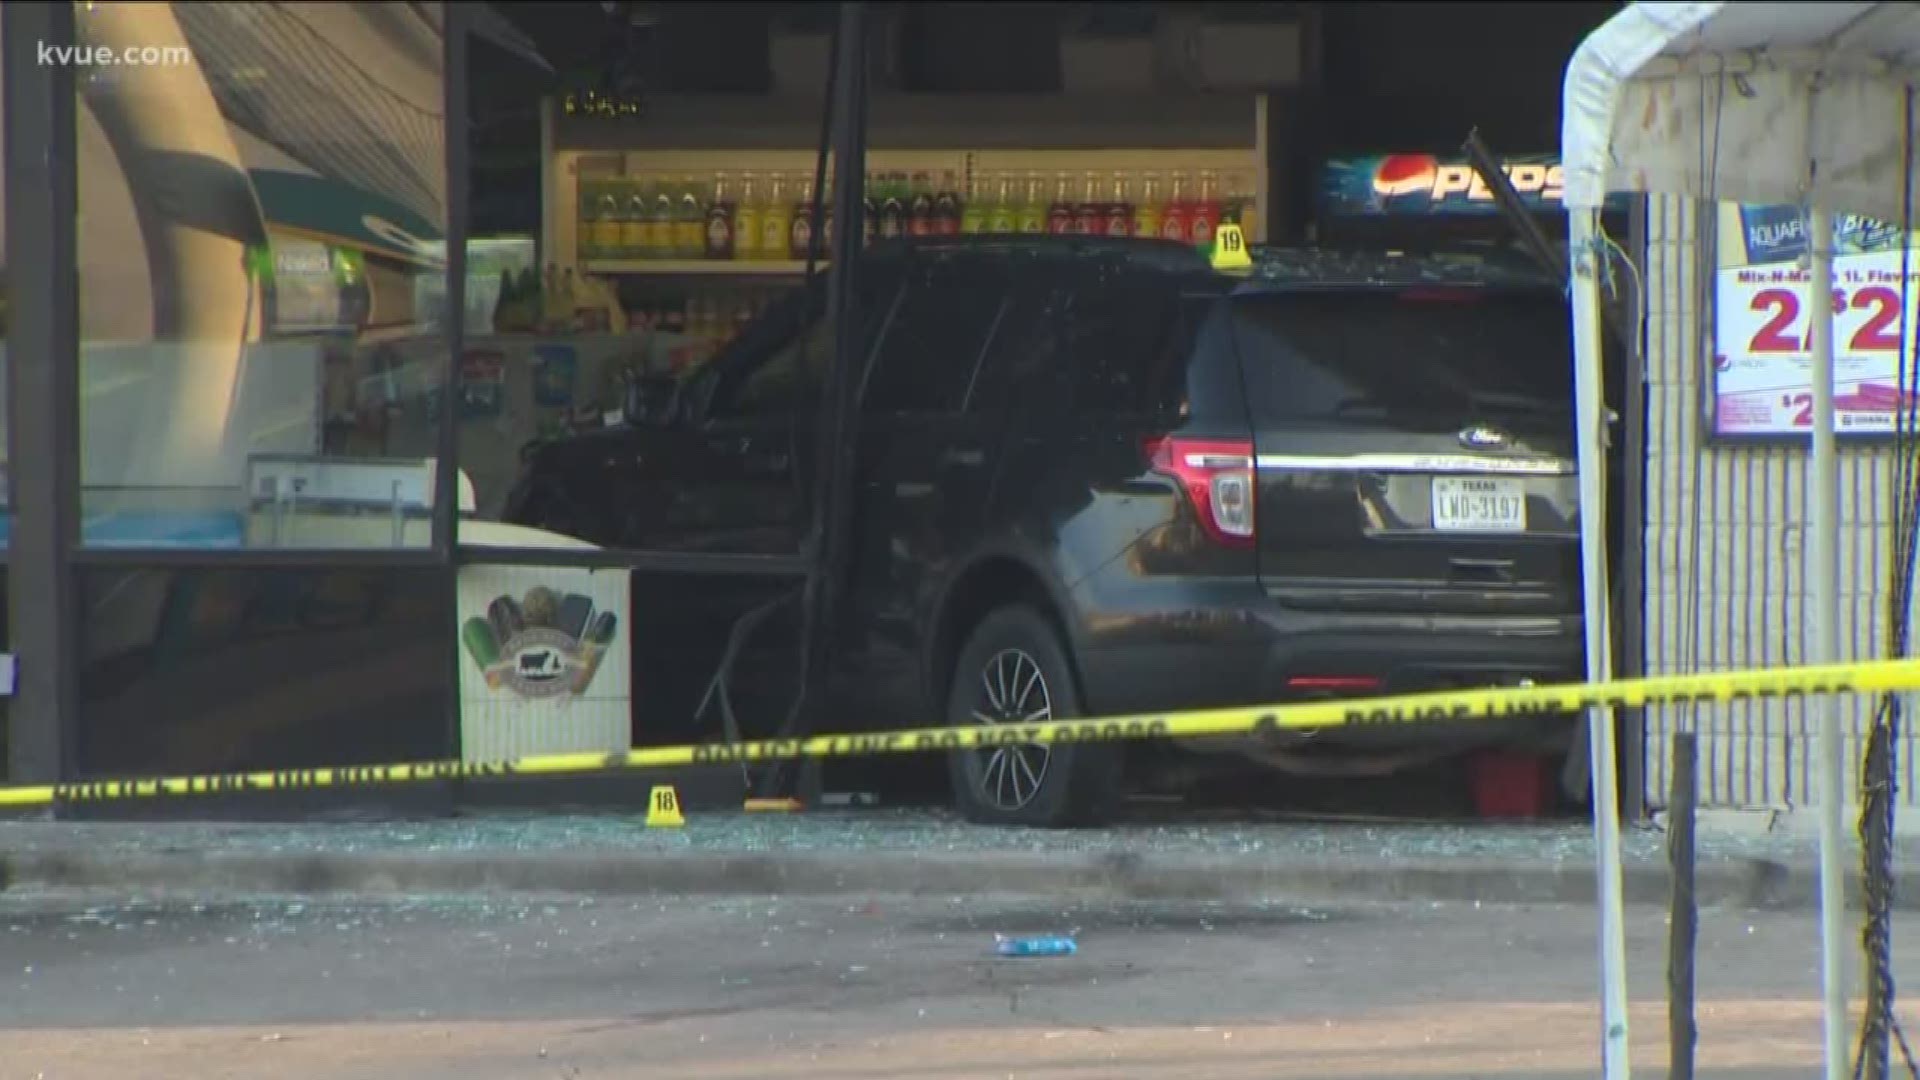 In an effort to get away, the woman drove into the convenience store, police said.